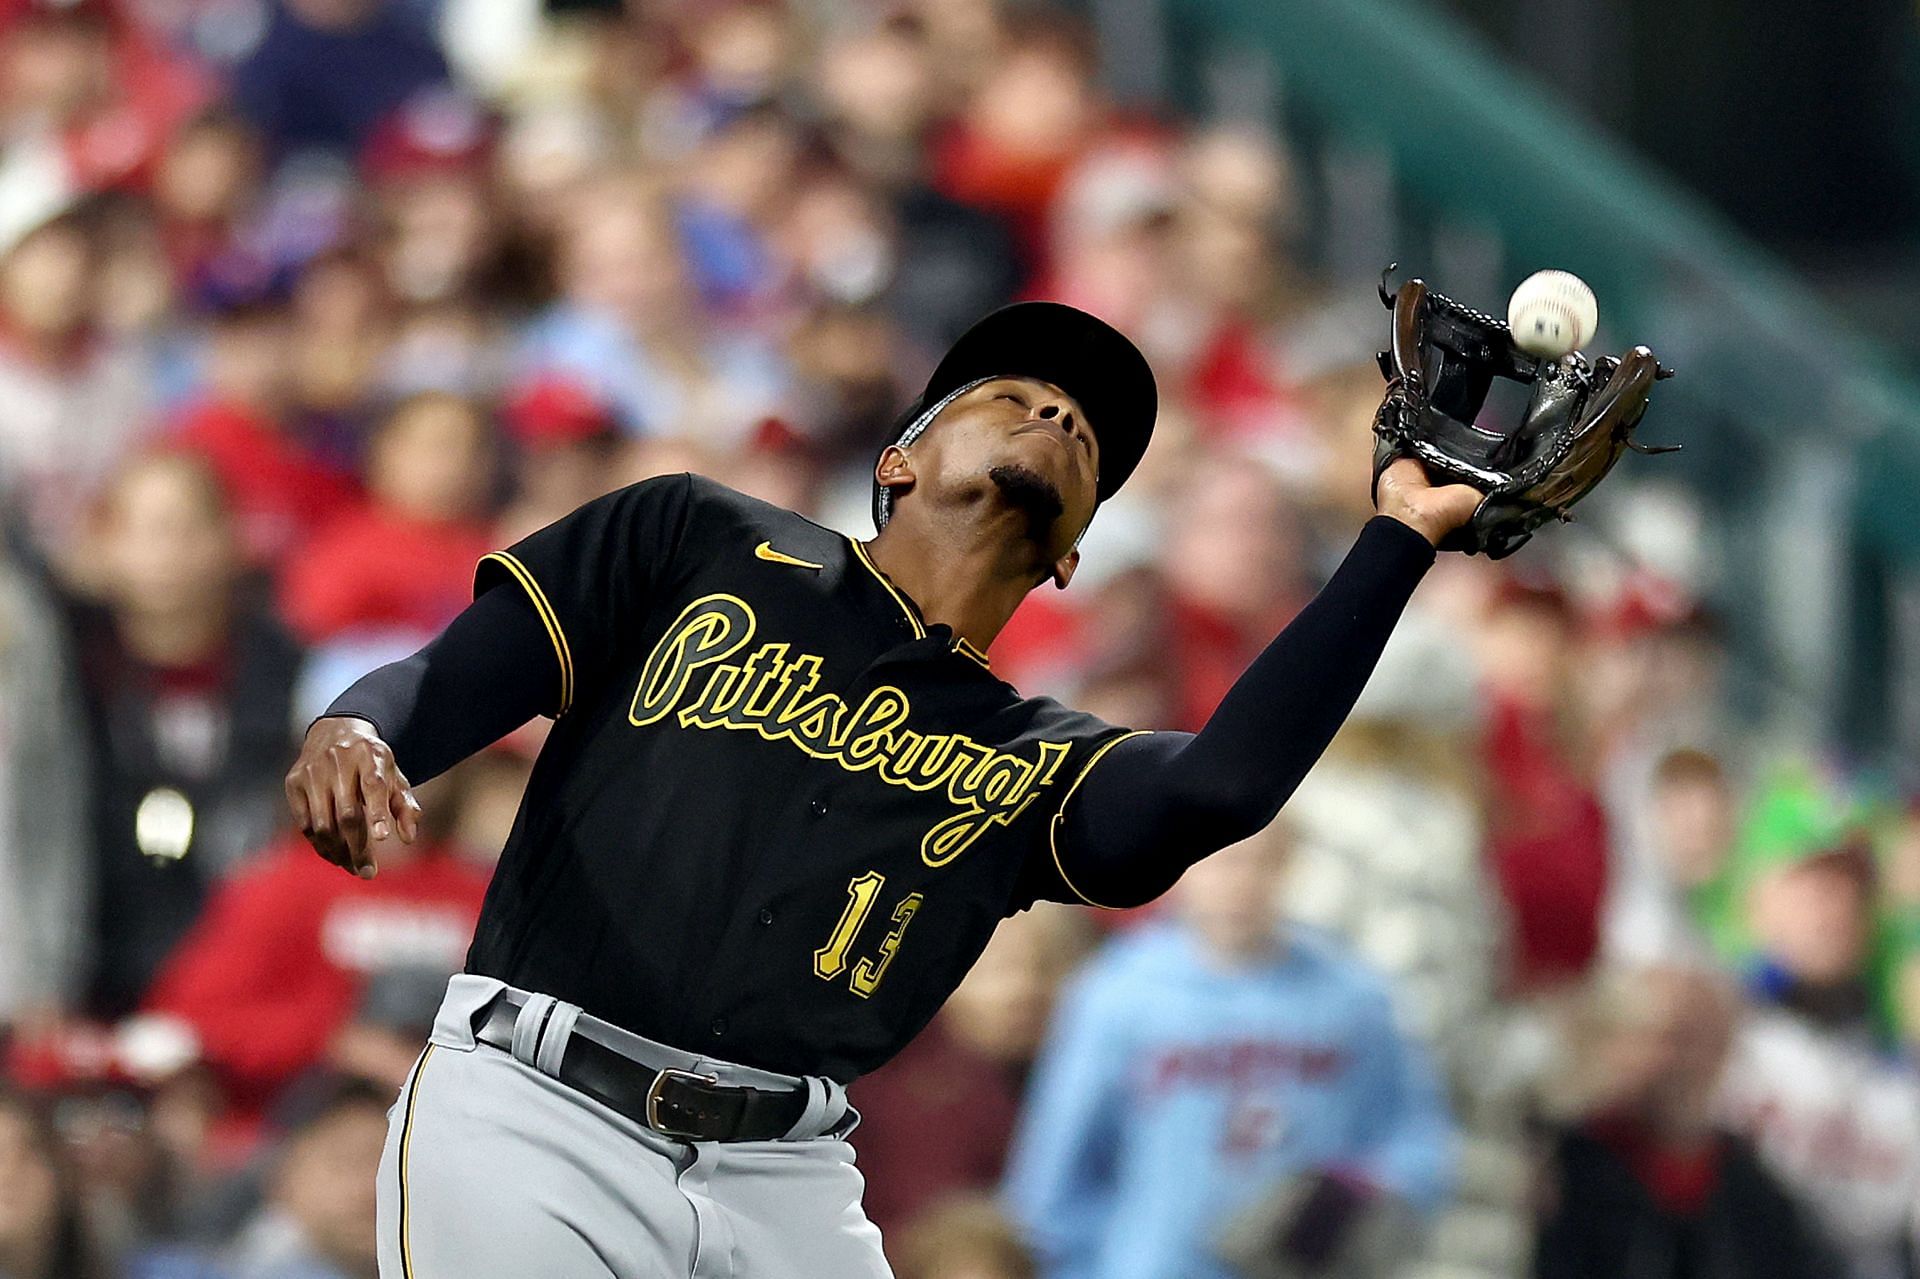 Ke'Bryan Hayes won a Gold Glove with the Pirates